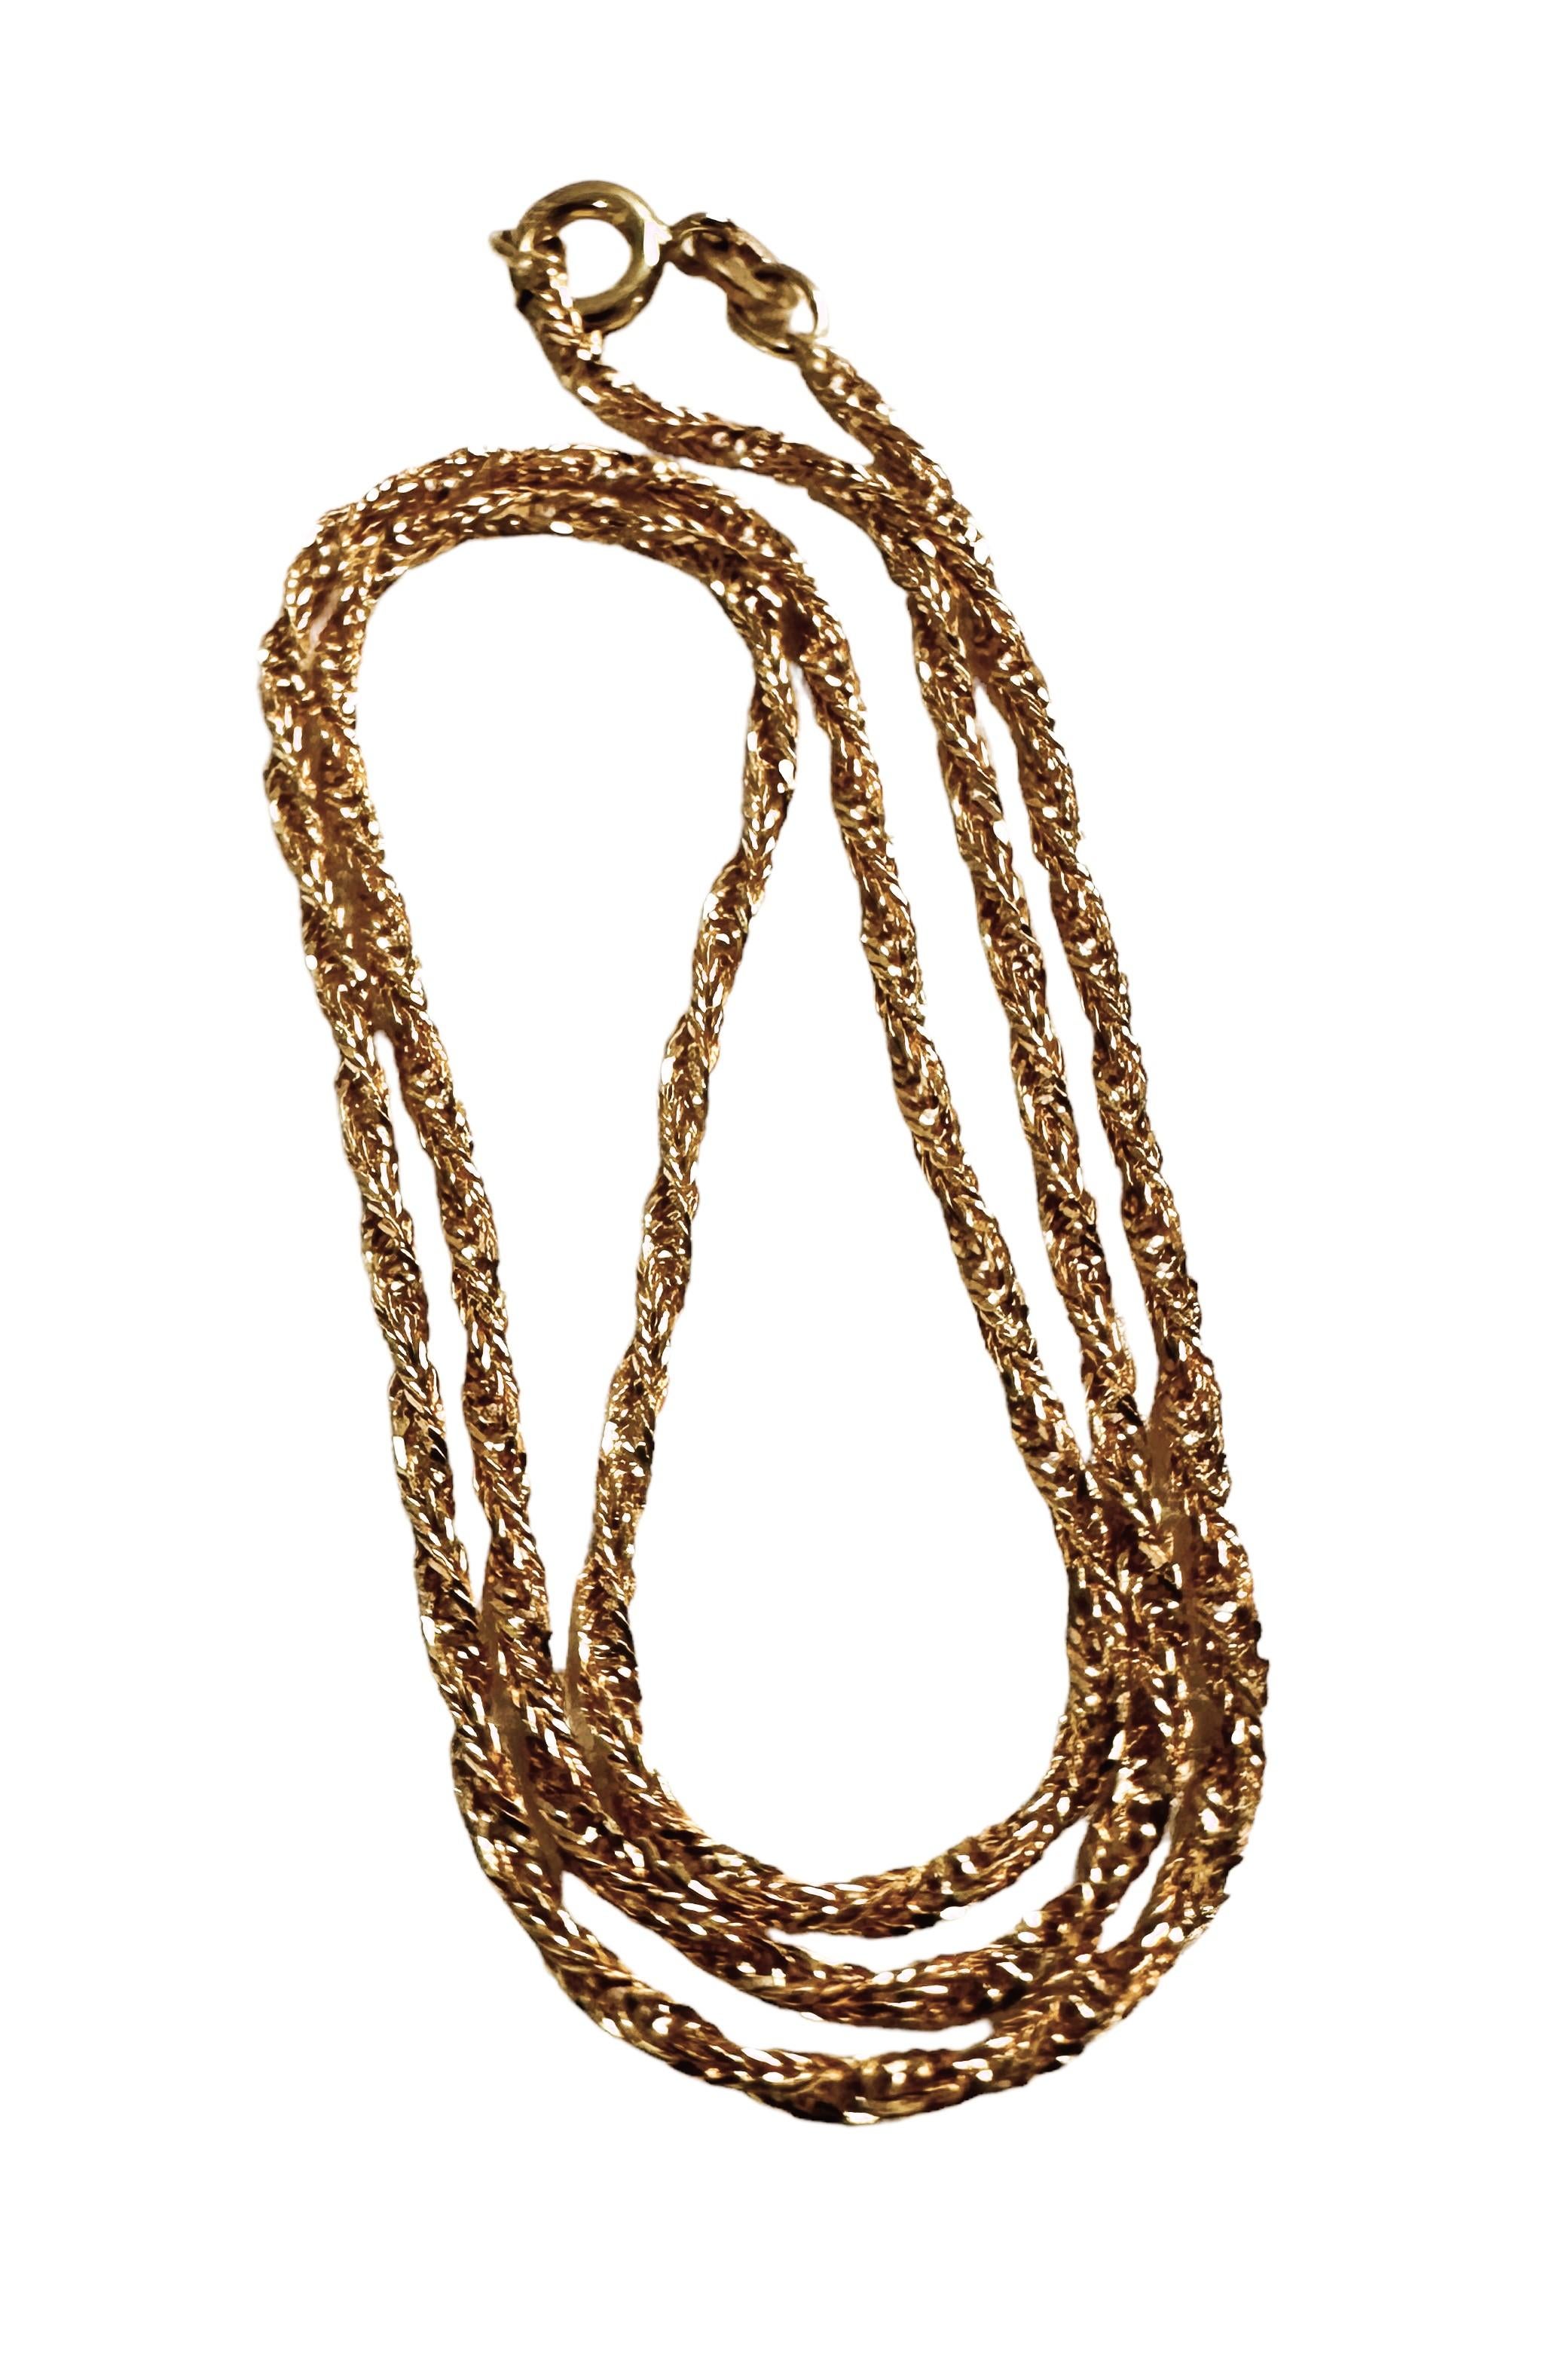 18k Yellow Gold Italian Unoaerre Necklace Chain 15.5 inches For Sale 3